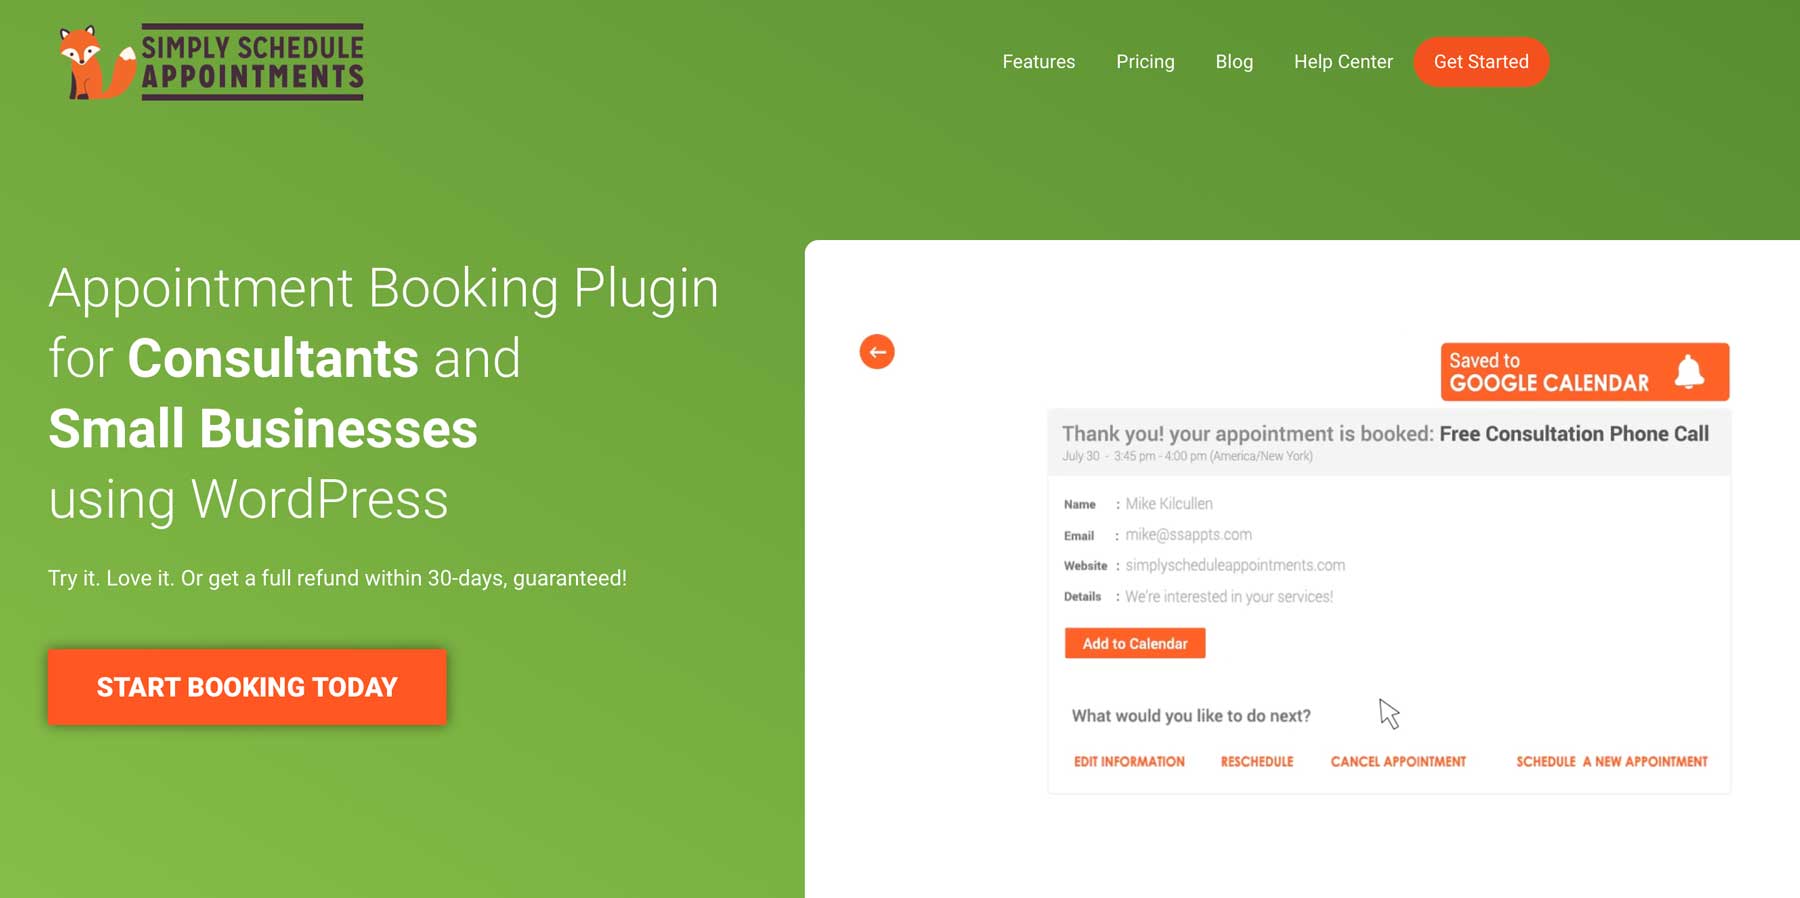 The Simply Schedule Appointments plugin